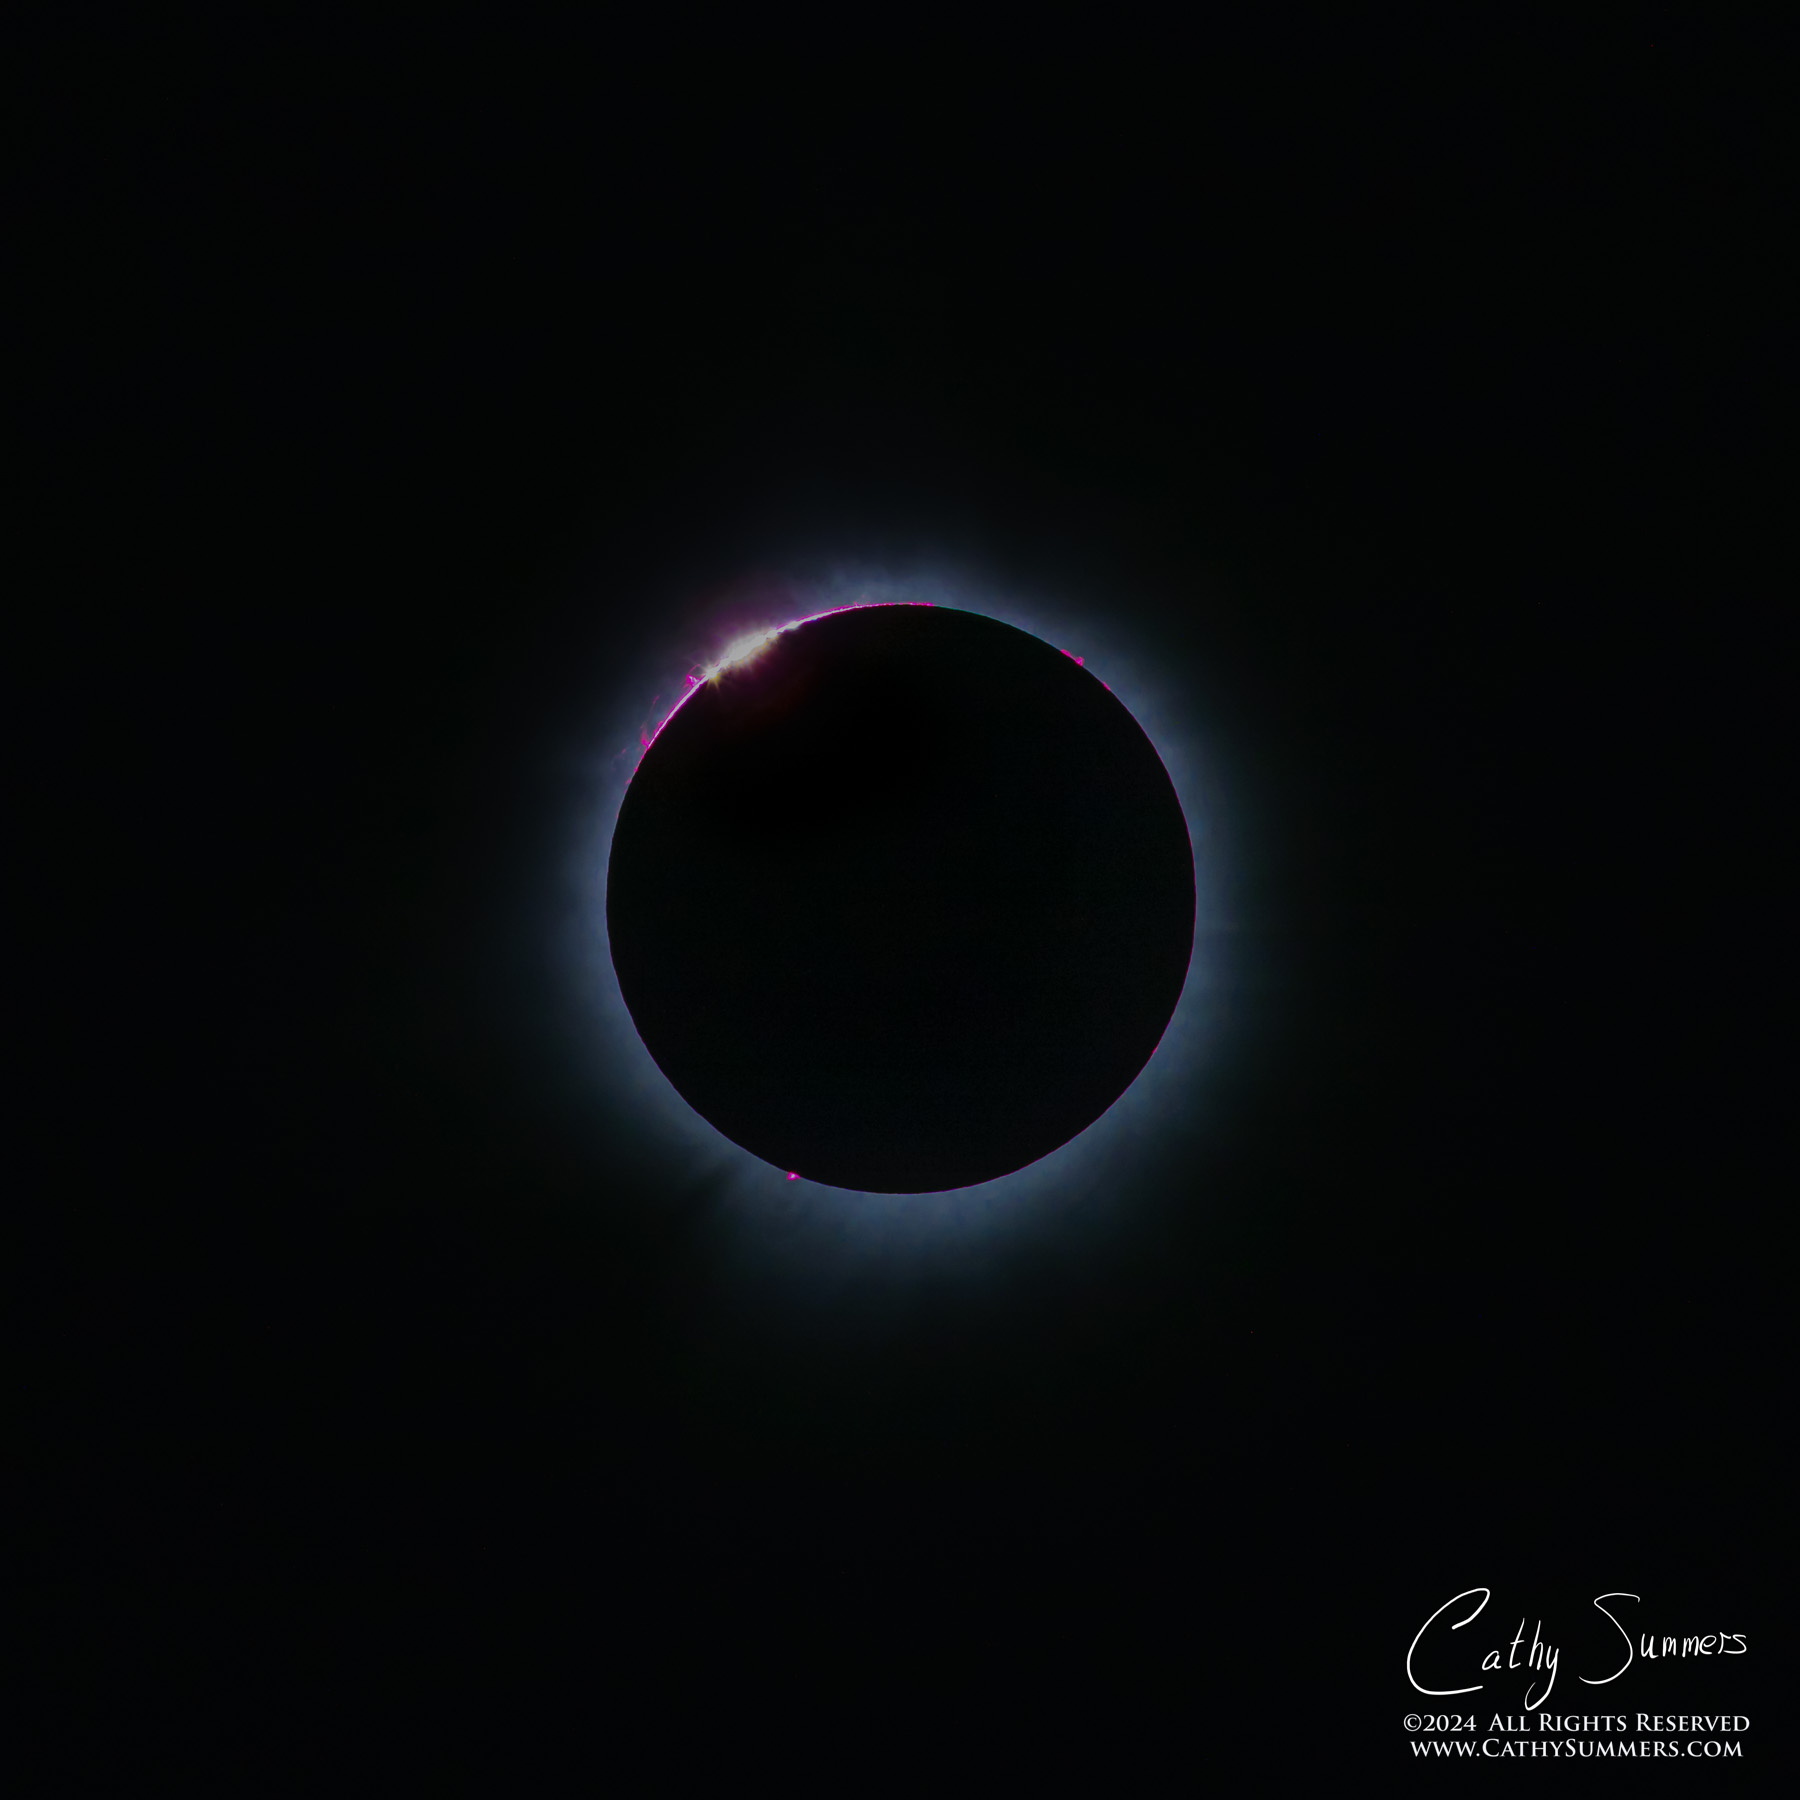 Diamond Ring, Baileys Beads and Solar Prominences During the 2024 Solar Eclipse as Totality Begins